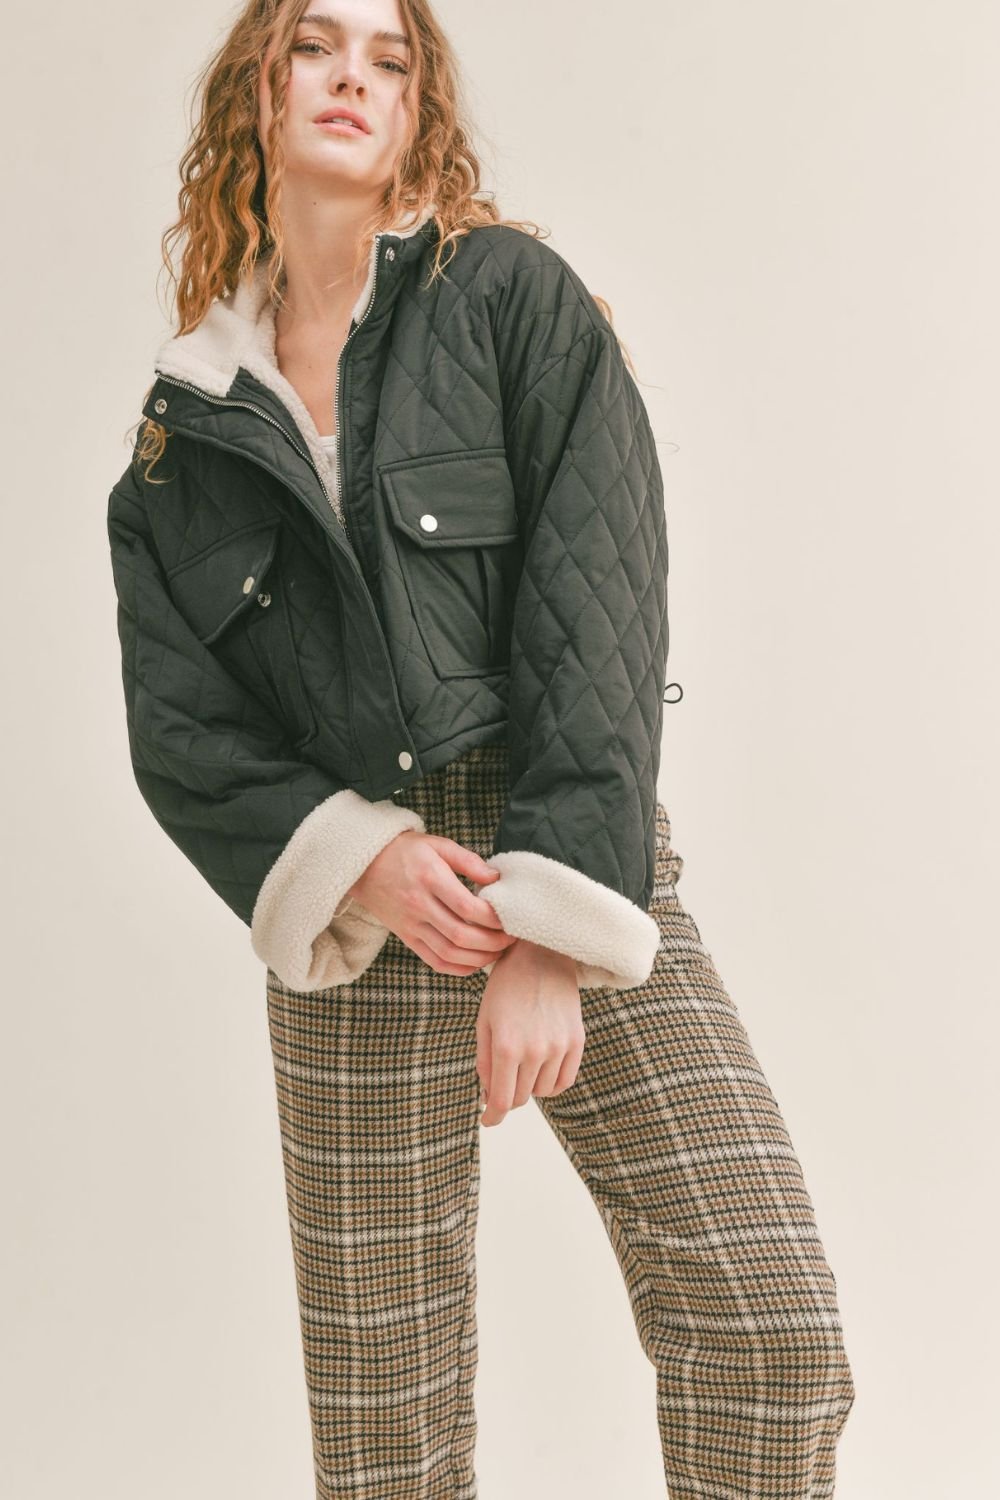 Women's Quilted Jacket | Cropped Fit | Black - Women's Jacket - Blooming Daily